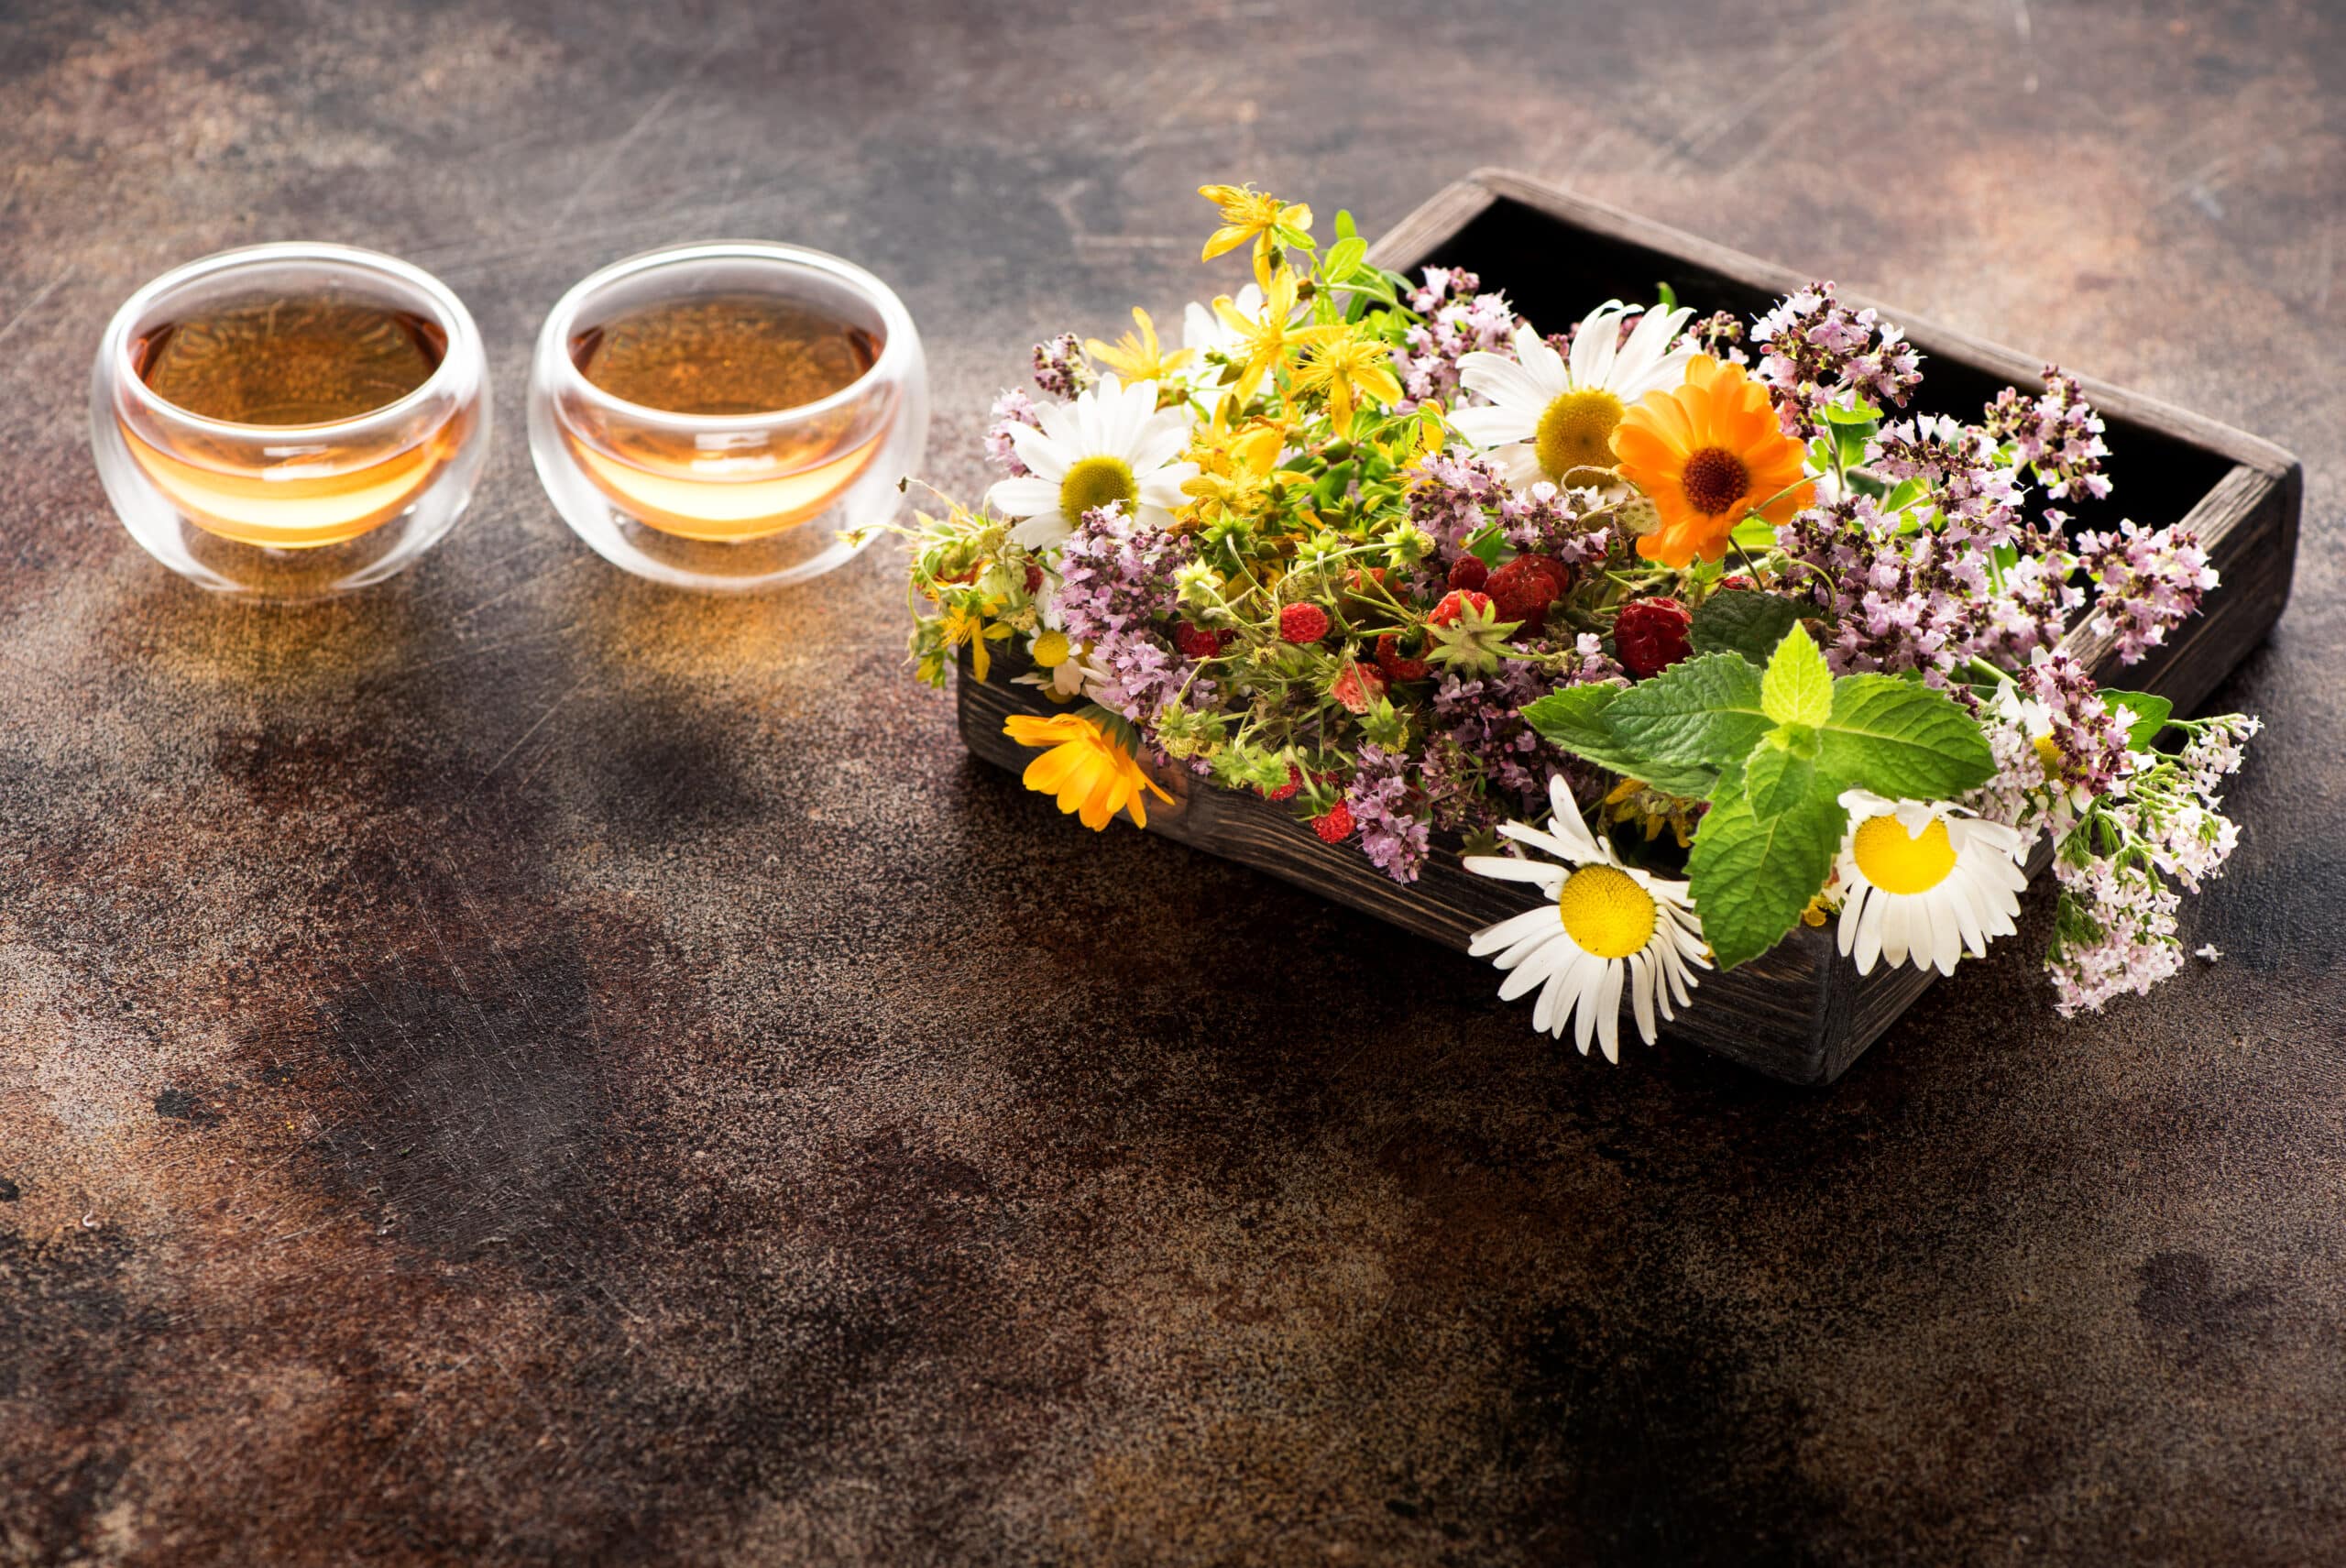 herbs and flowers for herbal healing tea in a wood 2022 02 23 21 34 01 utc scaled